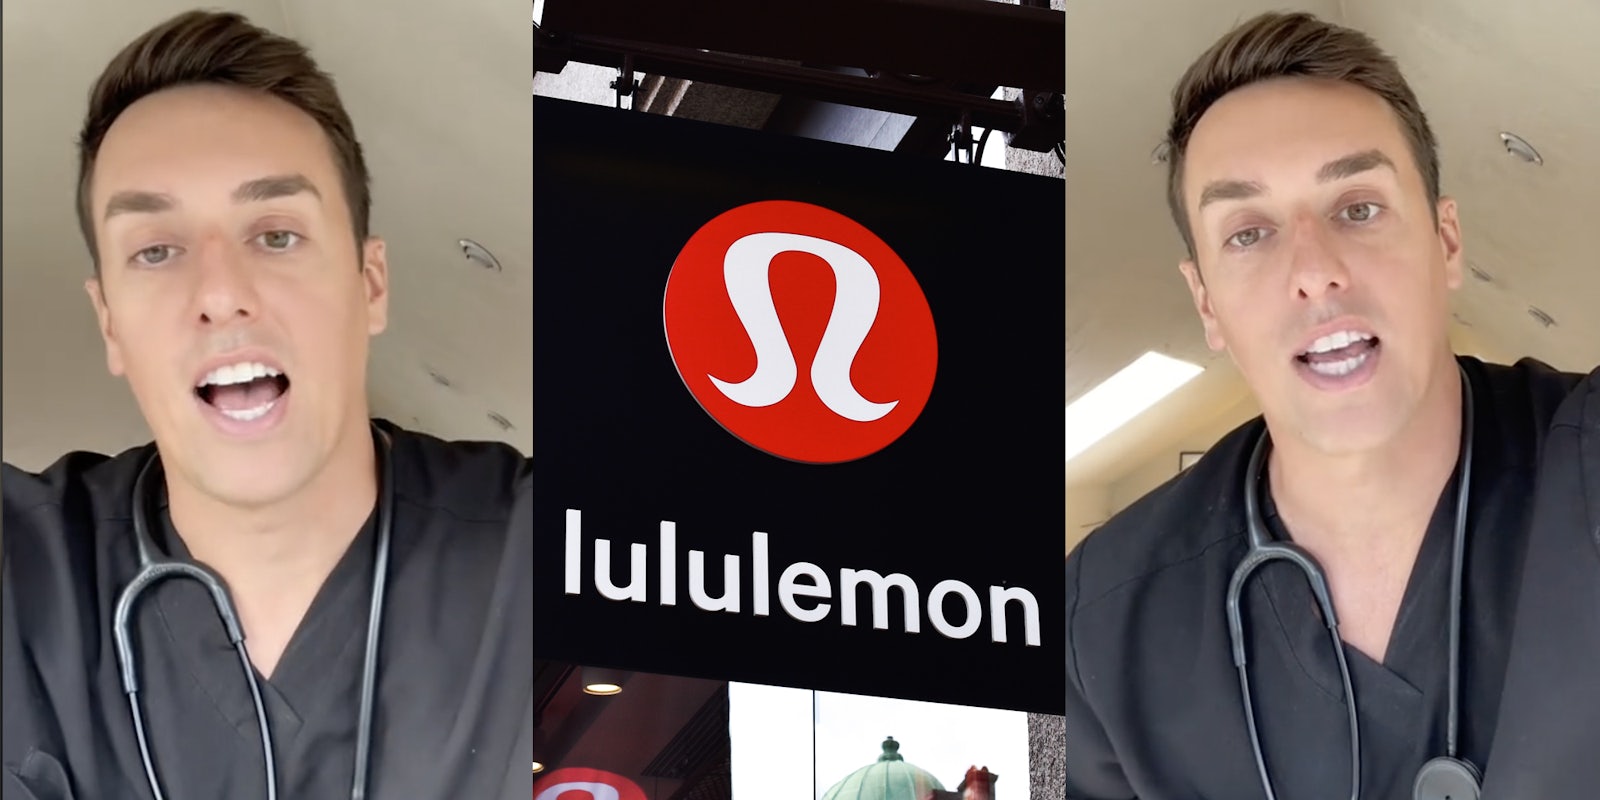 PA Slams Lululemon After He's Not Elligible for First Responders Discount